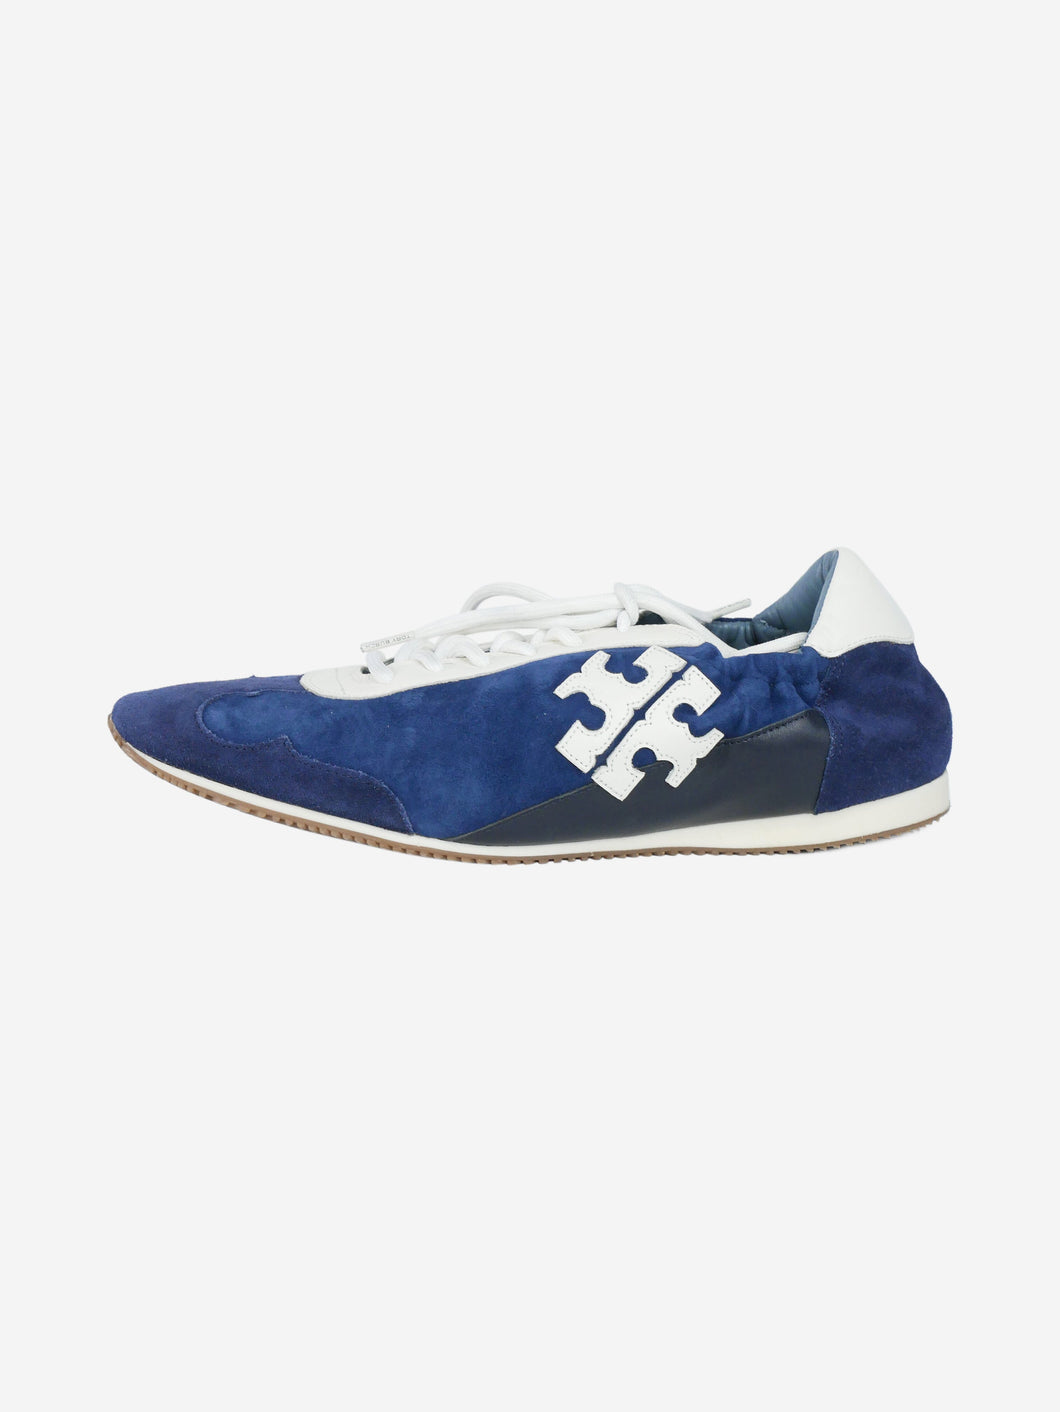 Tory Burch pre-owned blue suede trainers | SOTT